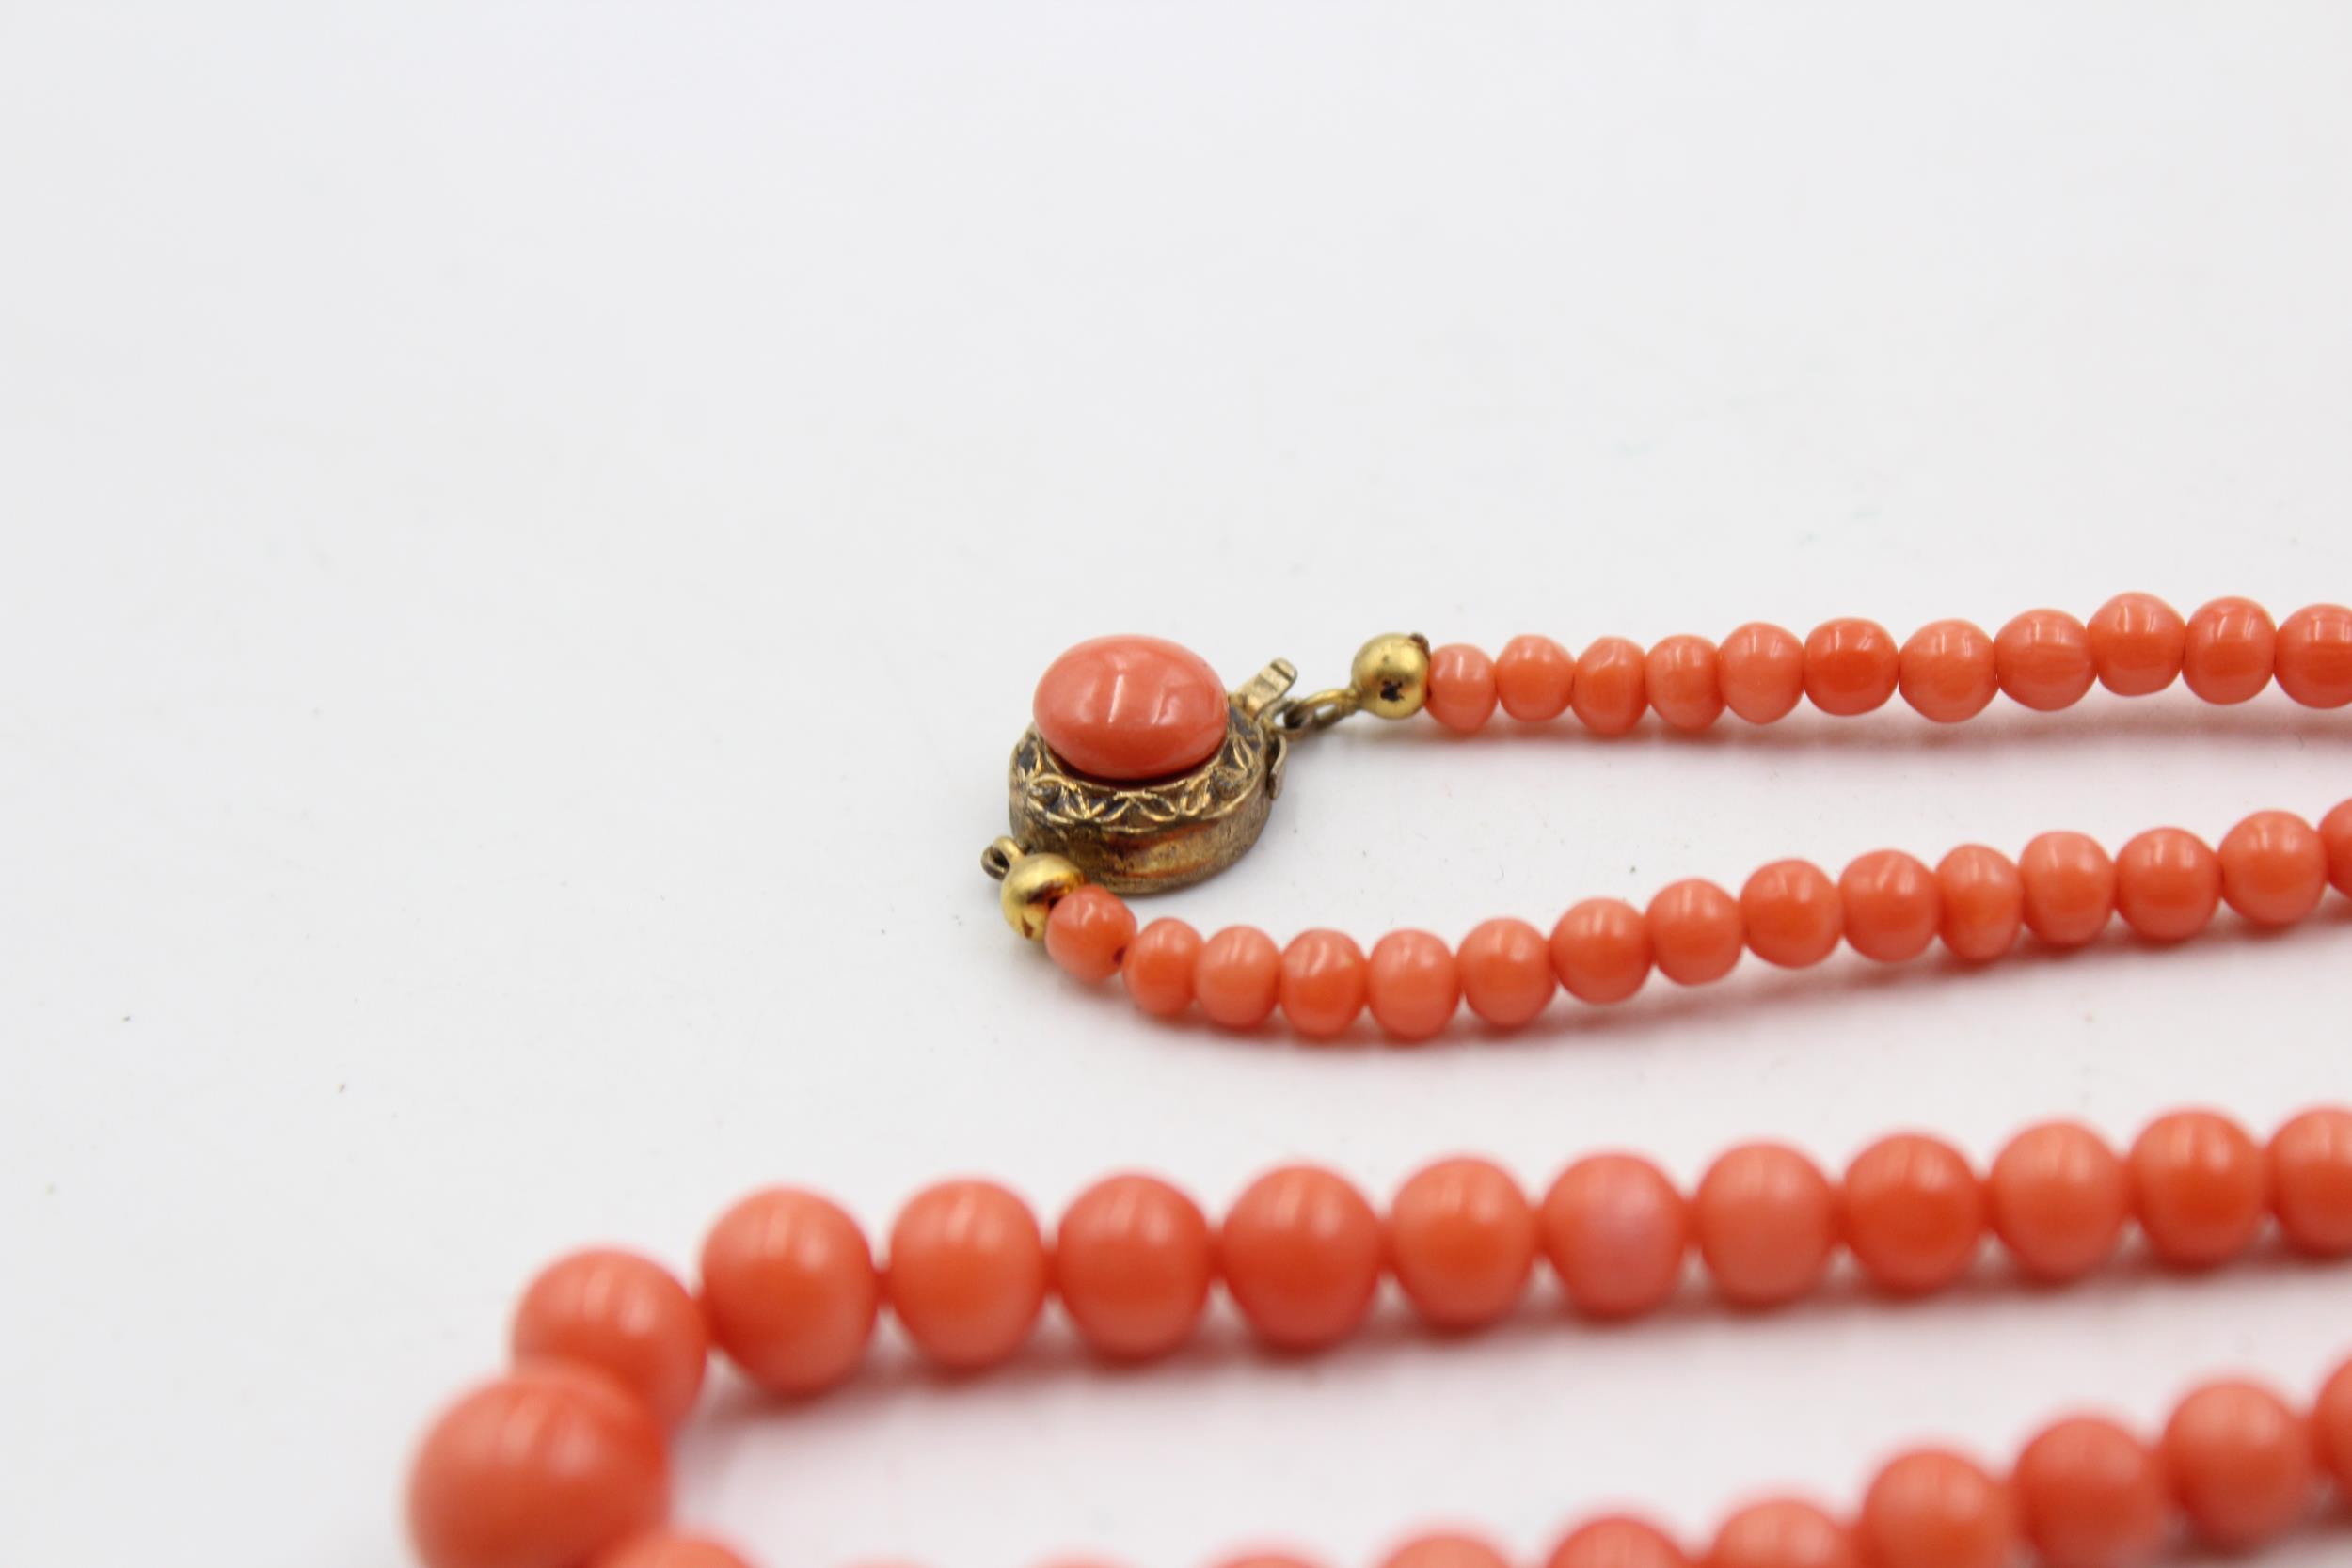 A Silver Clasped Graduated Coral Bead Necklace (24g) - Image 2 of 6